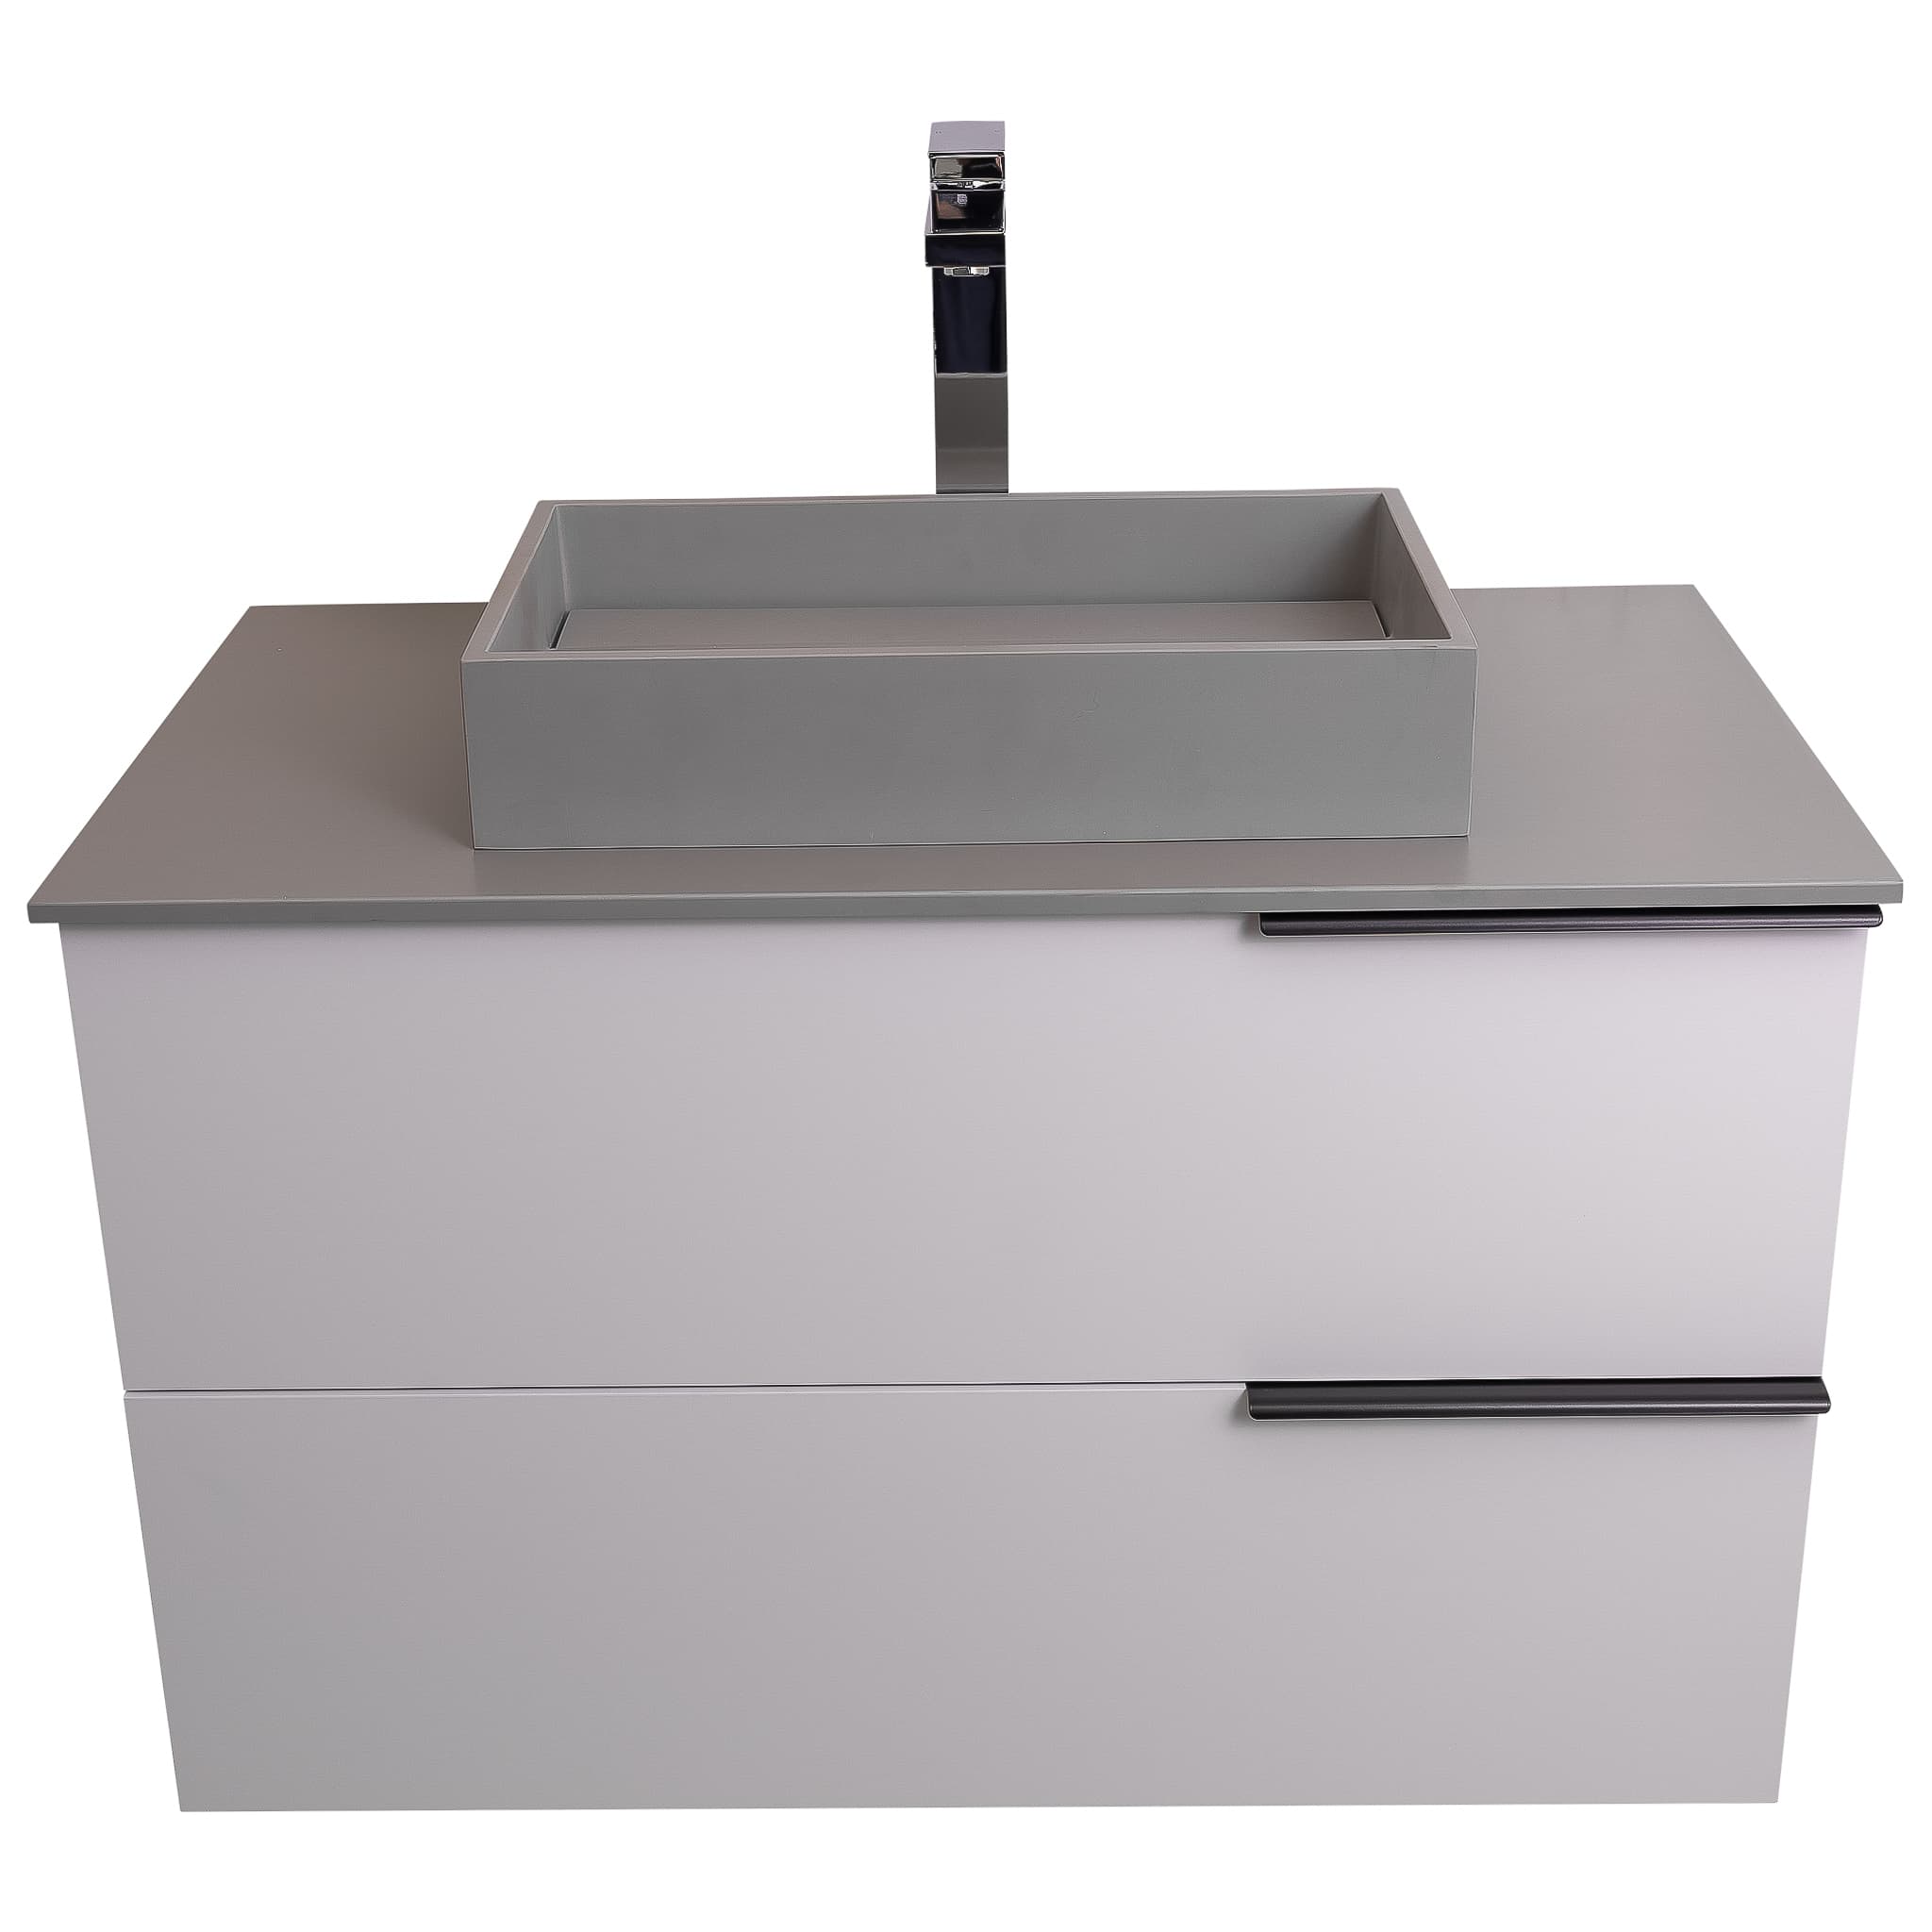 Mallorca 39.5 Matte White Cabinet, Solid Surface Flat Grey Counter And Infinity Square Solid Surface Grey Basin 1329, Wall Mounted Modern Vanity Set